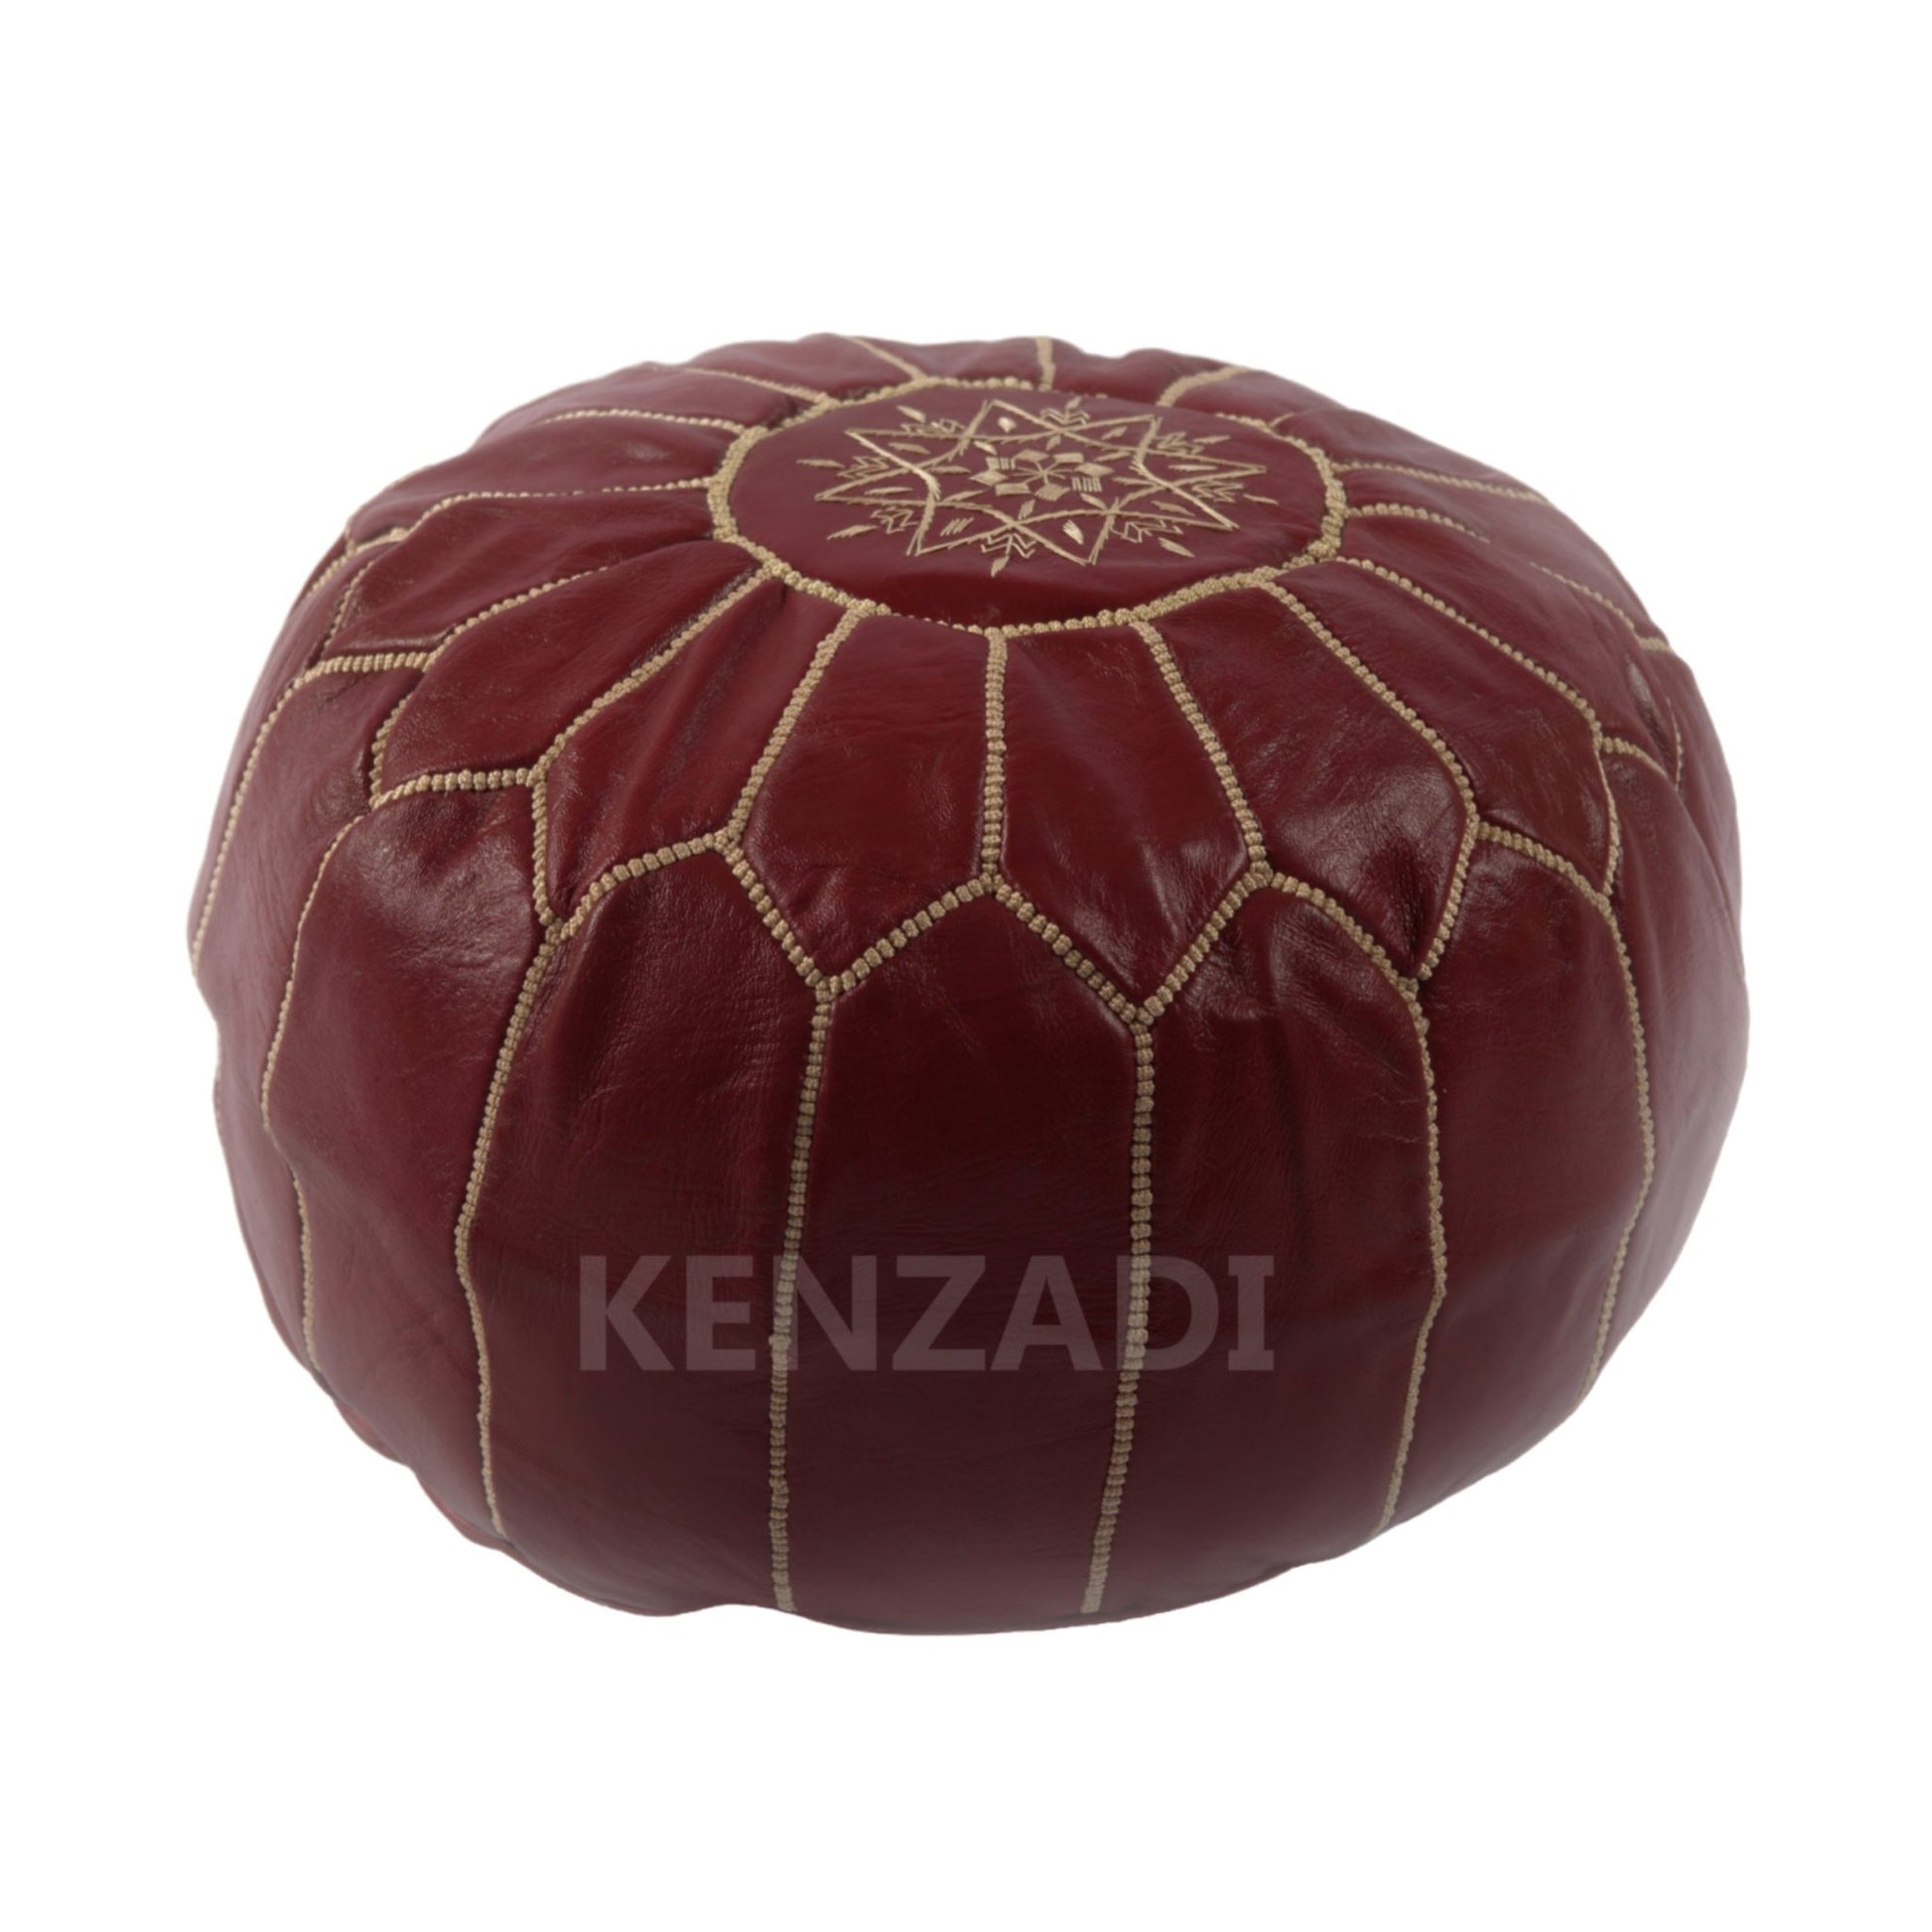 Moroccan leather pouf, round pouf, berber pouf, Bown pouf with Beige embroidery by Kenzadi - Handmade by My Poufs